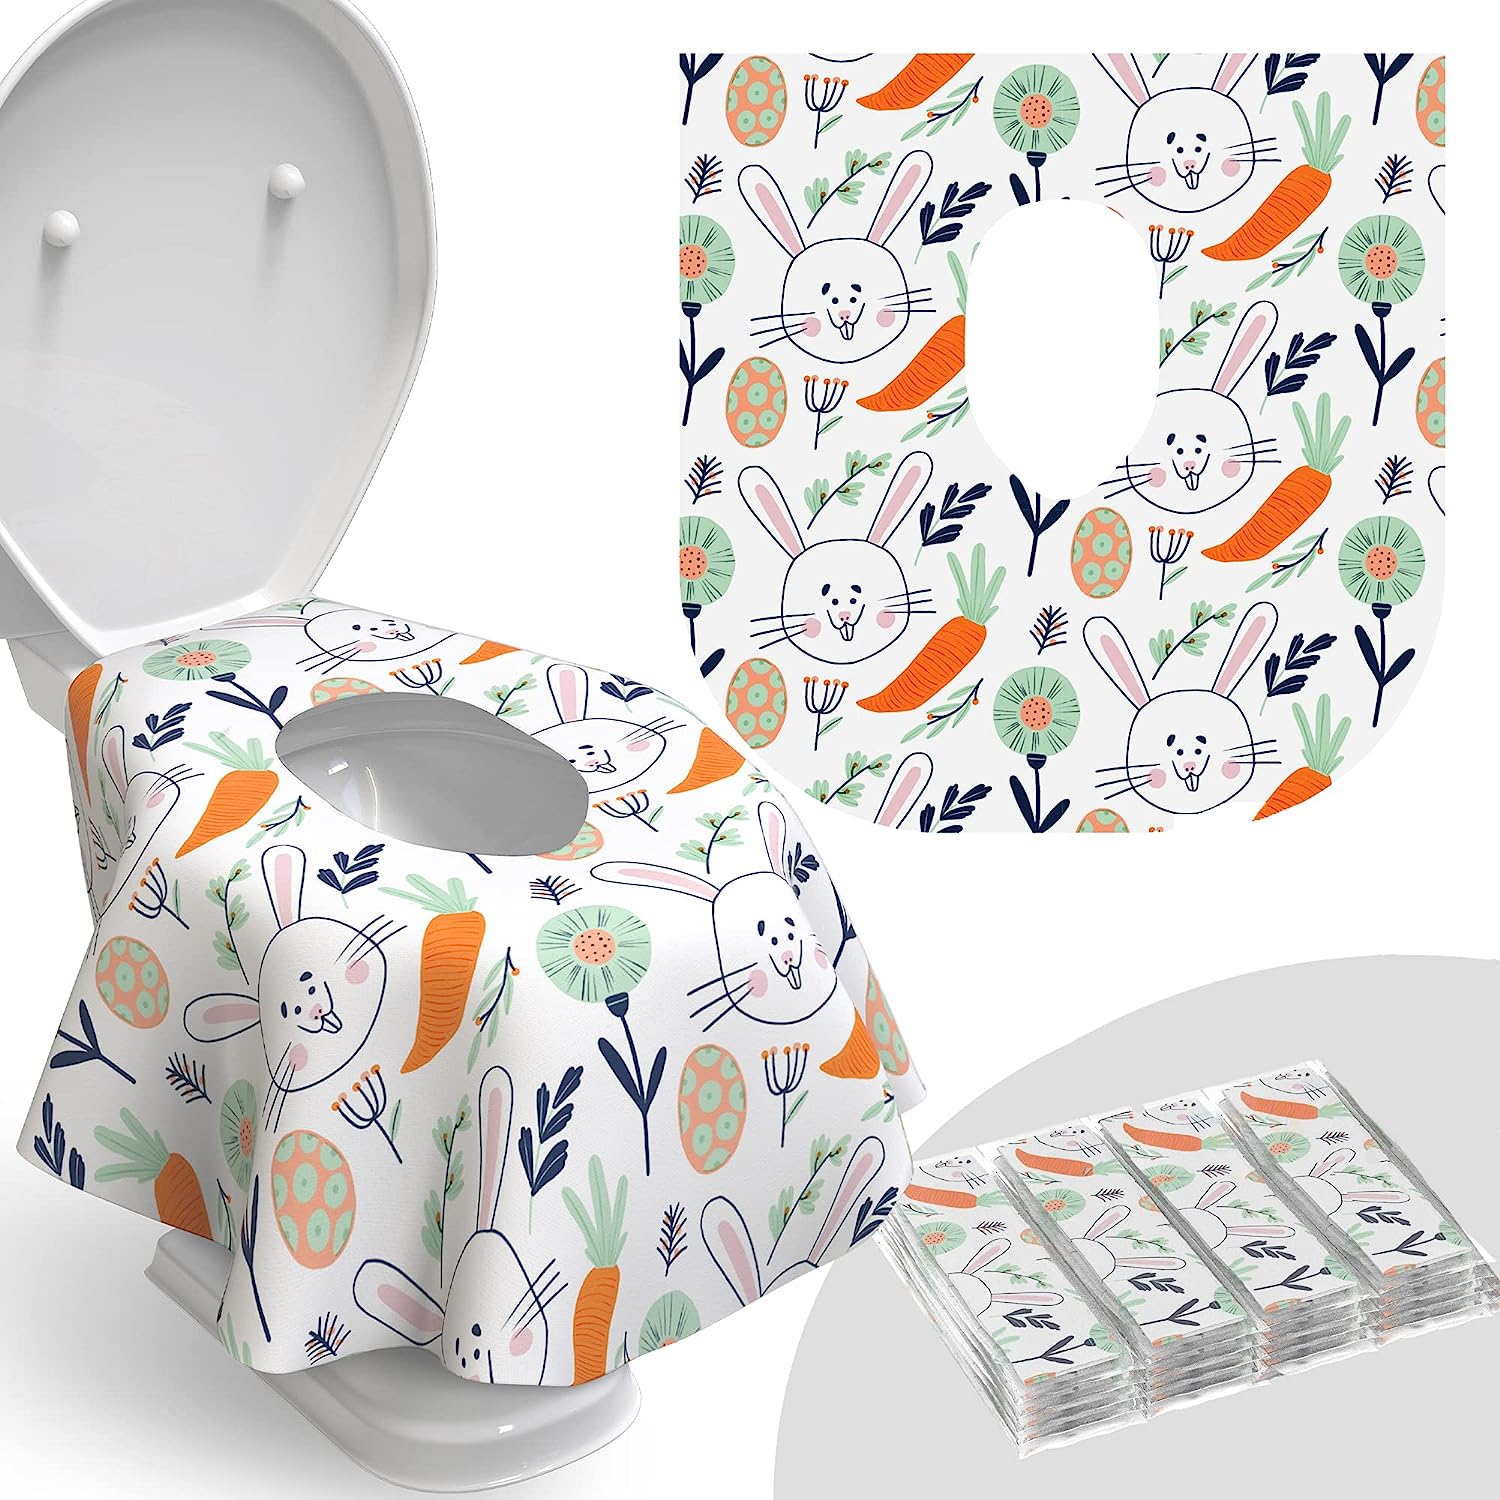 toilet seat covers making travel easy with kids